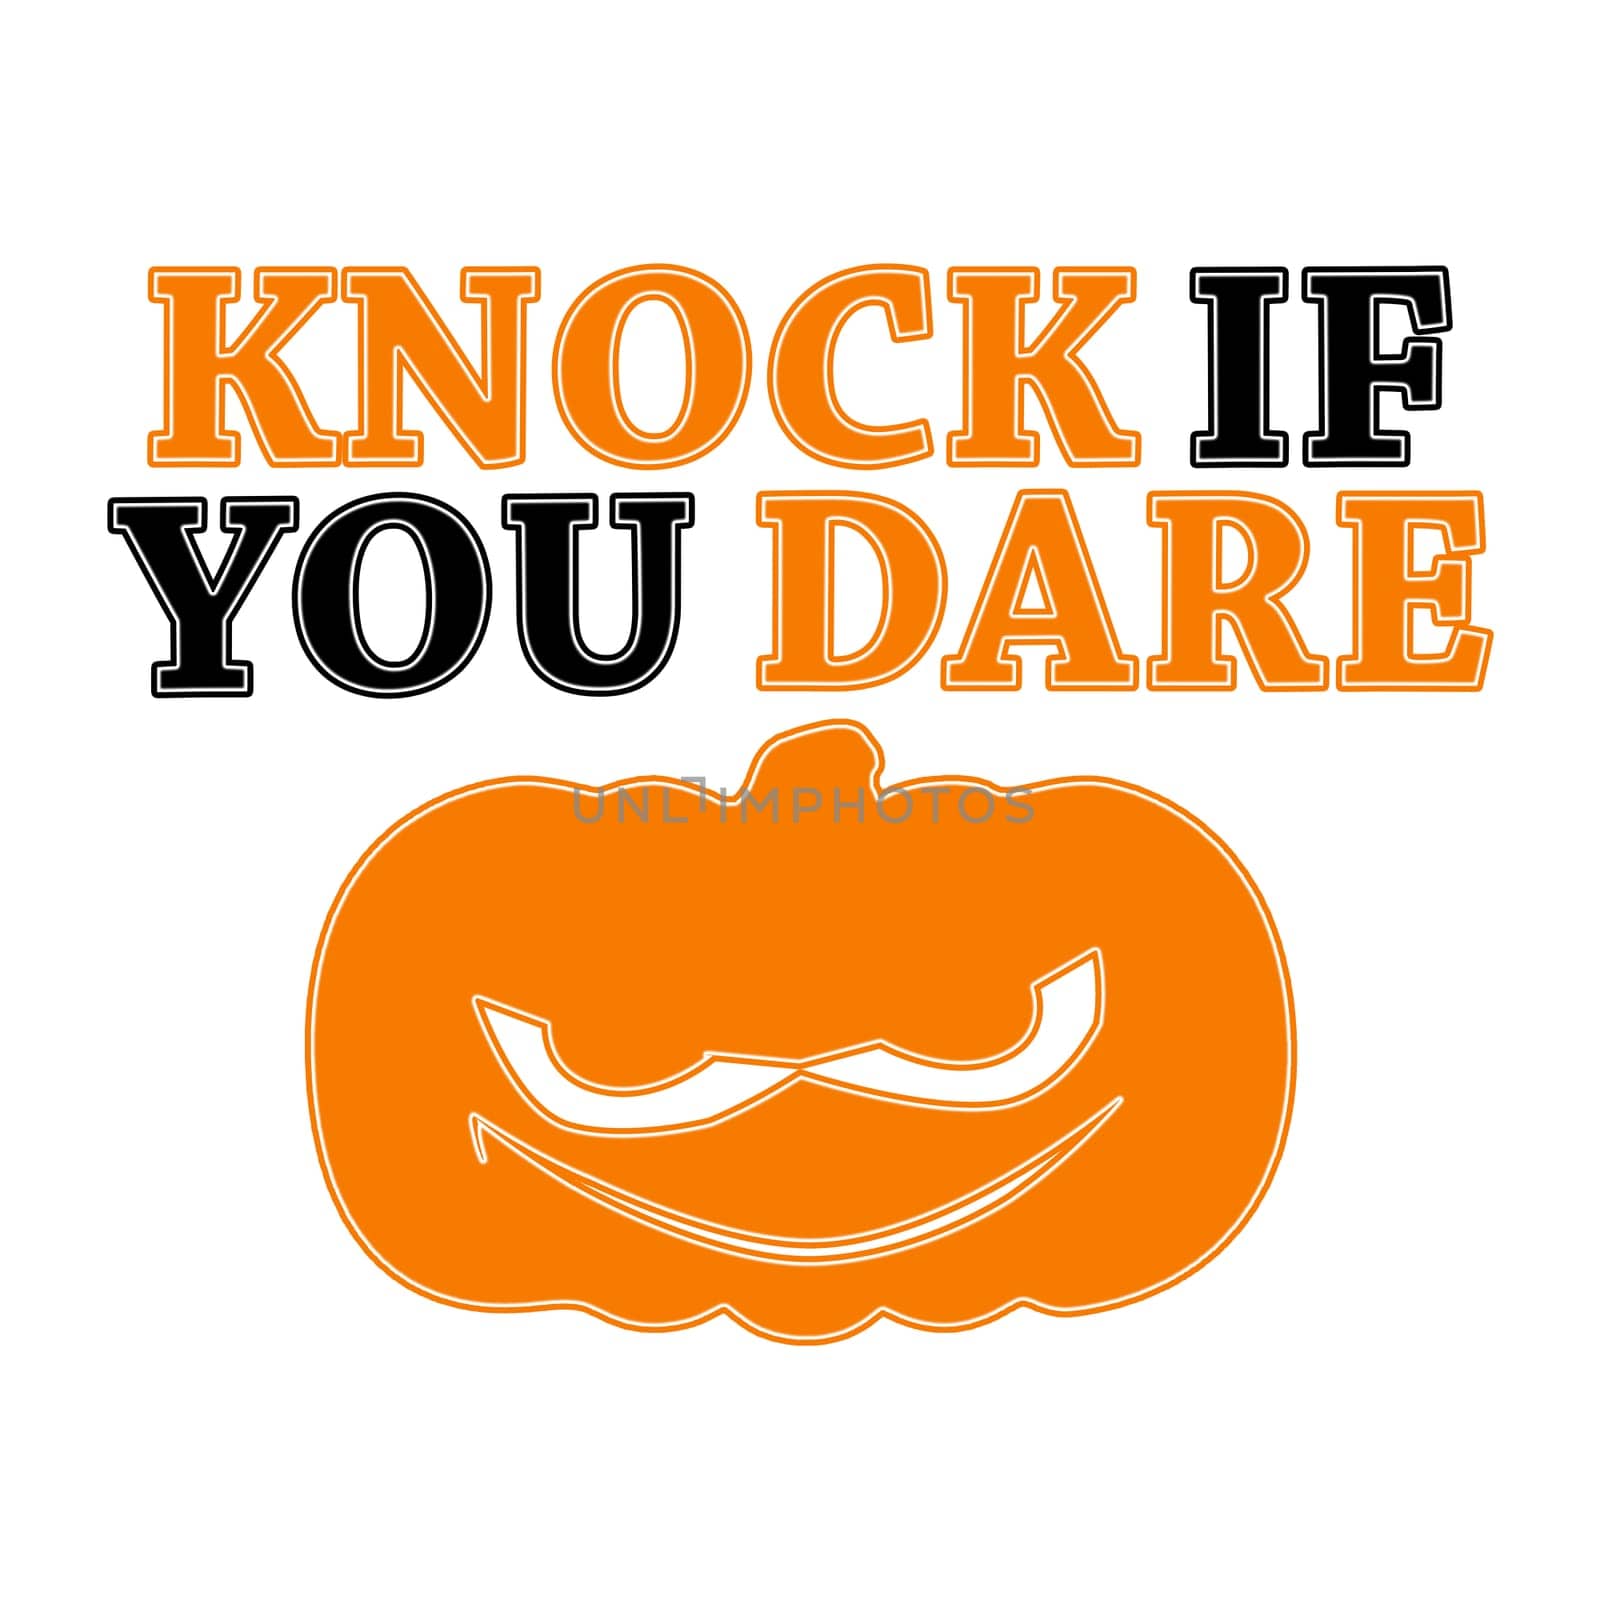 Knock if you dare by Bigalbaloo